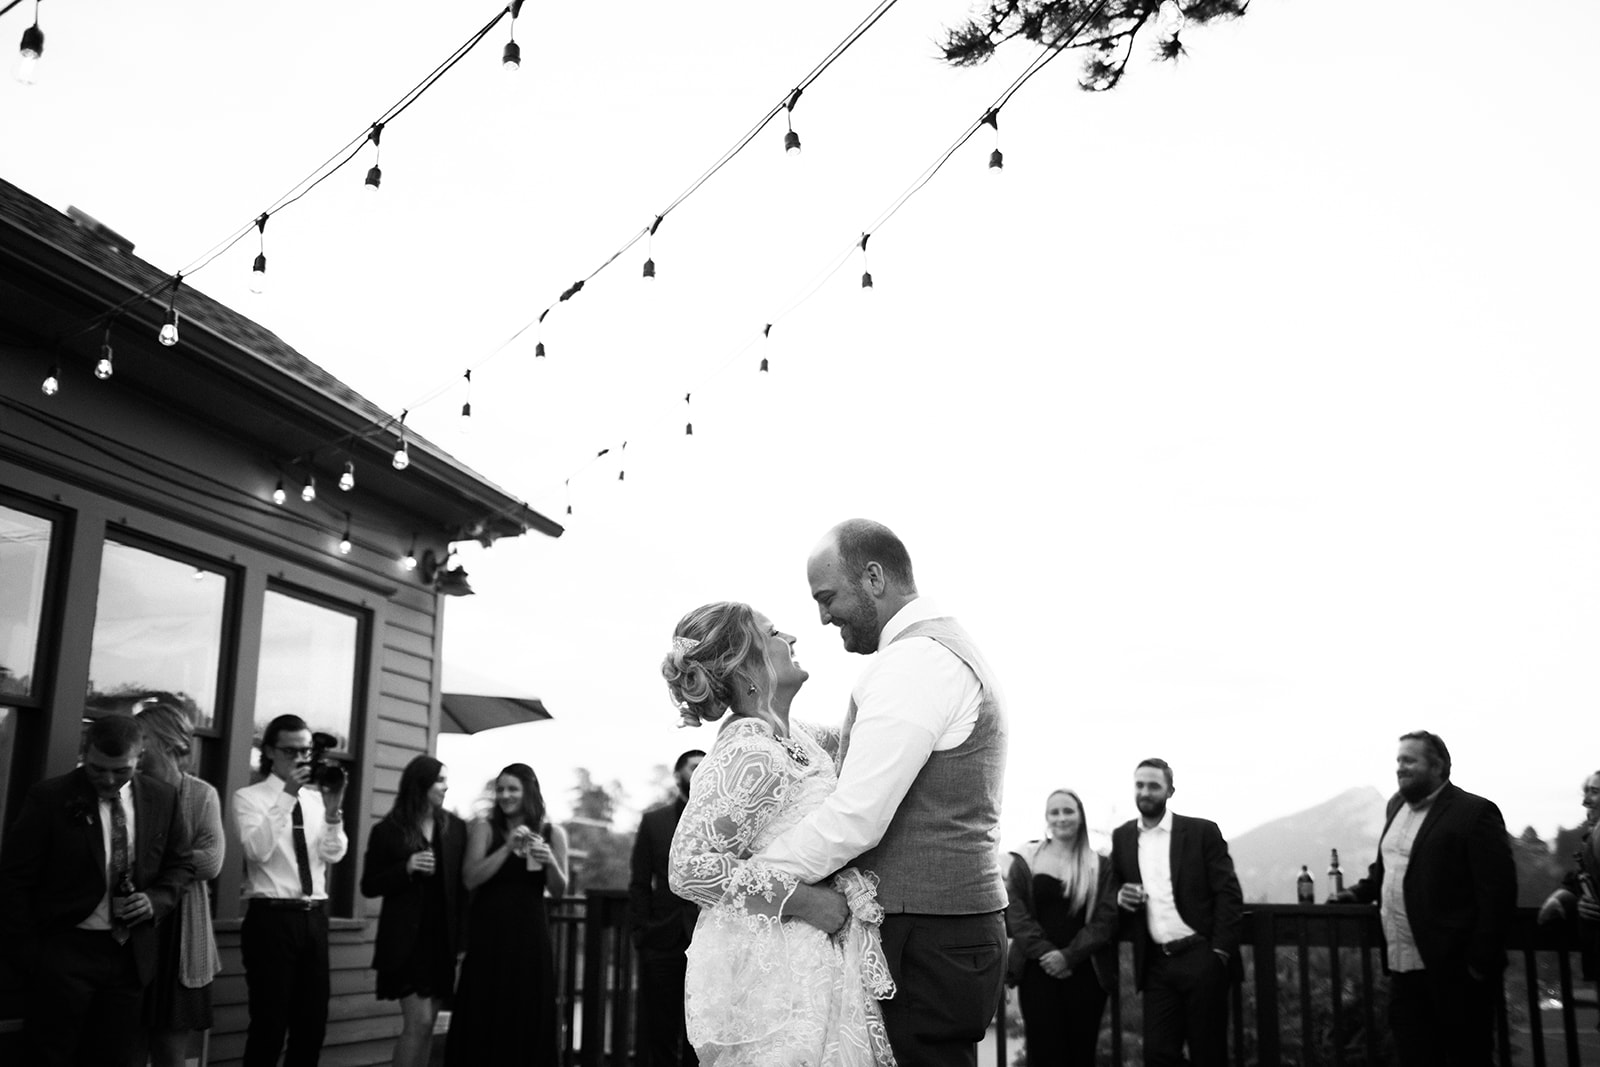 bride and groom first dance outdoor elopement ceremony with view of rocky mountains